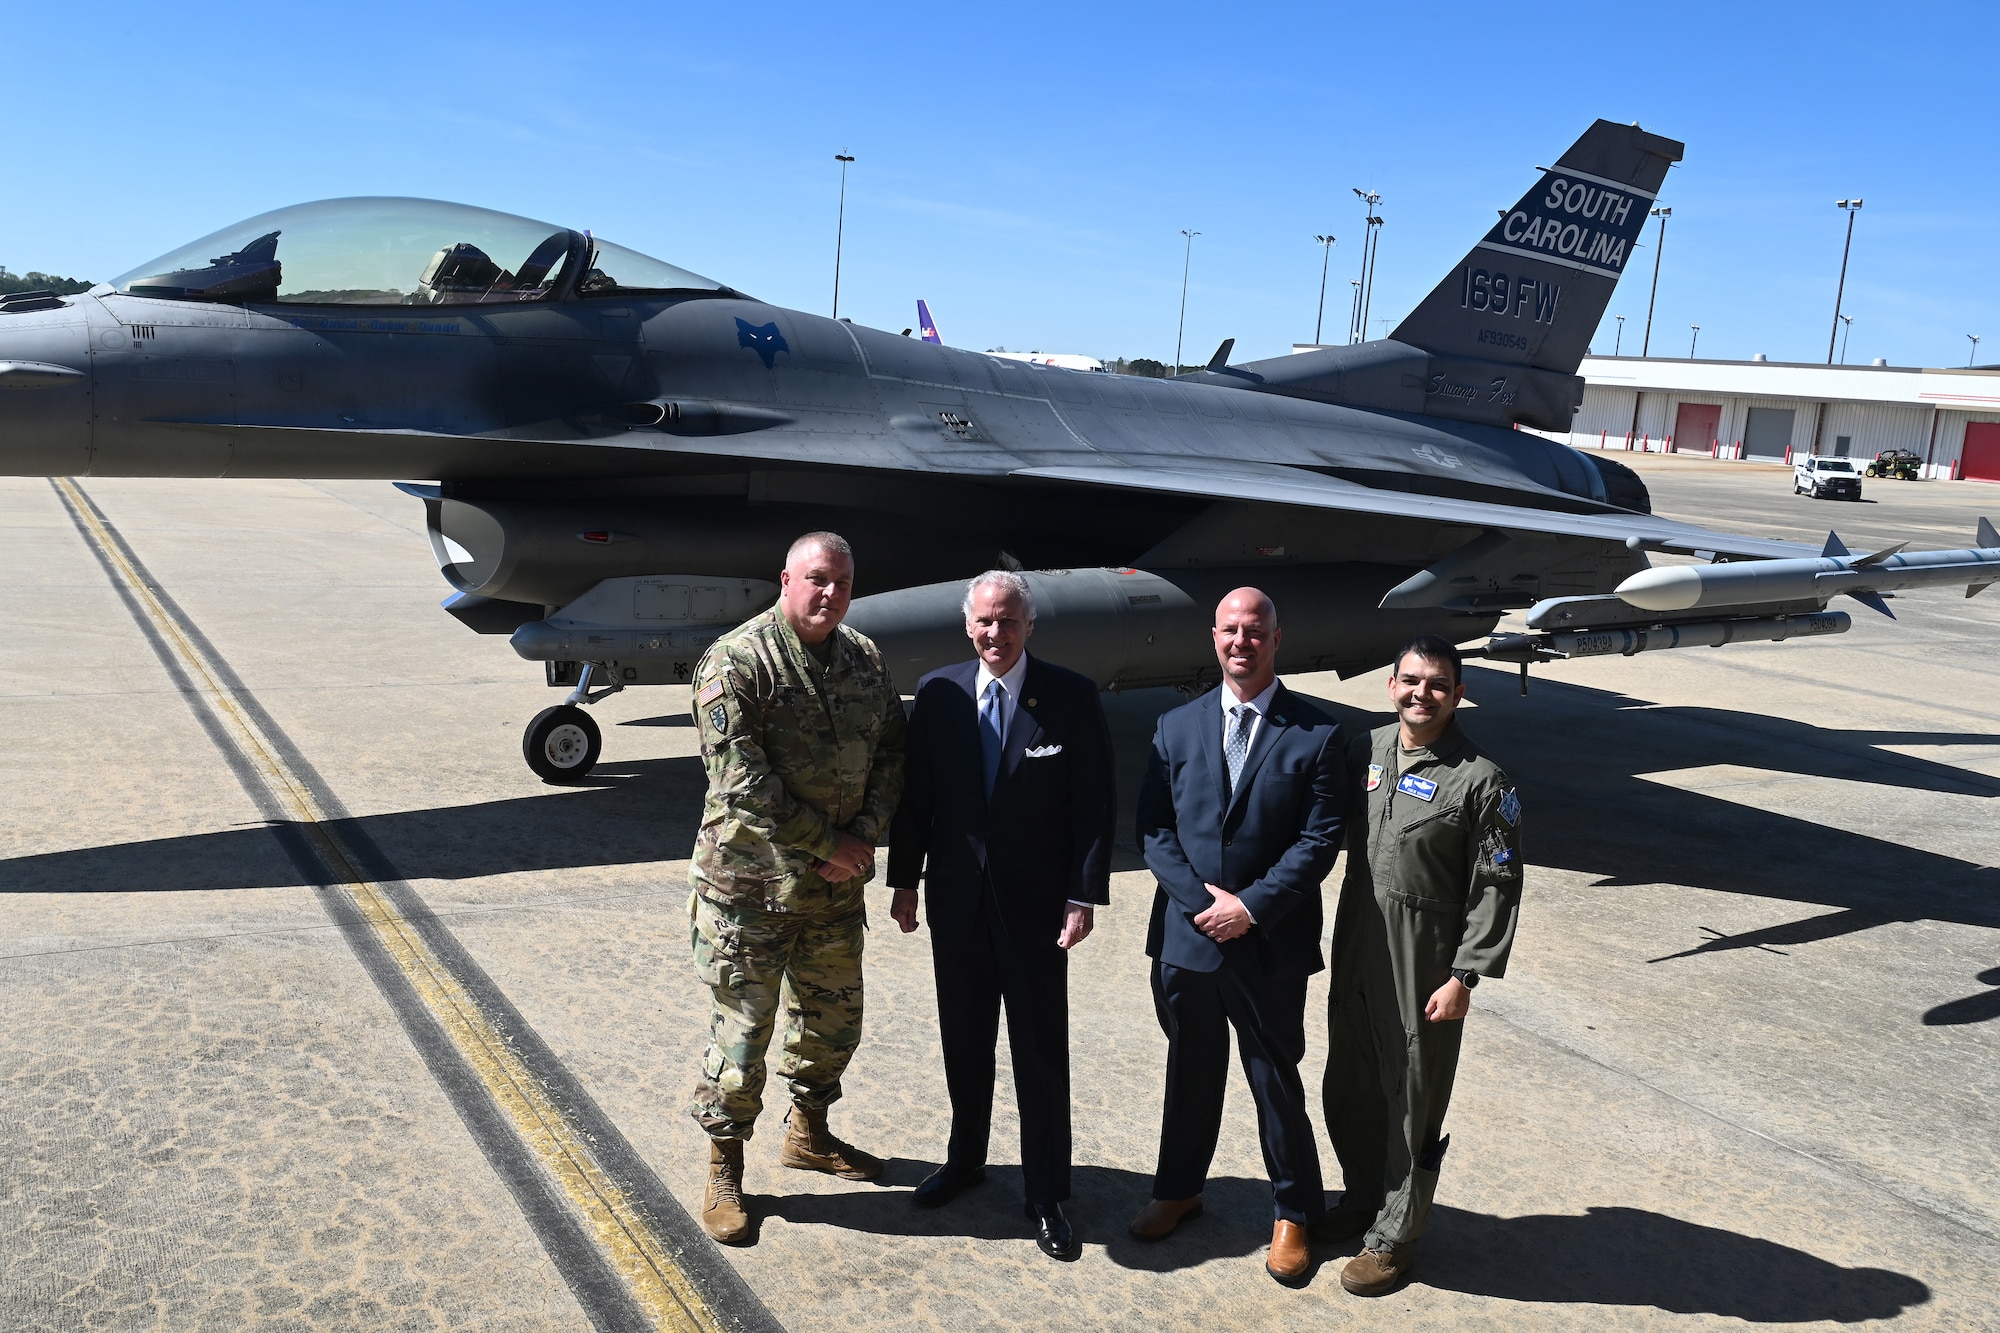 South Carolina Governor Henry McMaster, center-left, U.S. Army Maj. Gen. Van McCarty, left, The Adjutant General of South Carolina, U.S. Air Force Col. Quaid Quadri, far right, 169th Fighter Wing Commander, and Mike Gula, center-right, Executive Director at Columbia Metropolitan Airport, pose for a photo in front of the South Carolina Air National Guard's flagship F-16 fighter jet at Columbia Metropolitan Airport, March 21, 2022. Columbia Metropolitan Airport hosts a press conference to announce a six-month temporary move of F-16 fighter jet flying operations from the the South Carolina Air National Guard's 169th Fighter Wing at nearby McEntire Joint National Guard Base to their airport in Columbia, South Carolina. This joint partnership, regarding the temporary relocation of F-16 aircraft, will begin in April 2022. Speaking during the press conference are South Carolina Governor Henry McMaster; U.S. Army Maj. Gen. Van McCarty, The Adjutant General of South Carolina; U.S. Air Force Col. Quaid Quadri, 169th Fighter Wing Commander; and Mike Gula Executive Director at Columbia Metropolitan Airport.  (U.S. Air National Guard photo by Senior Master Sgt. Edward Snyder, 169th Fighter Wing)